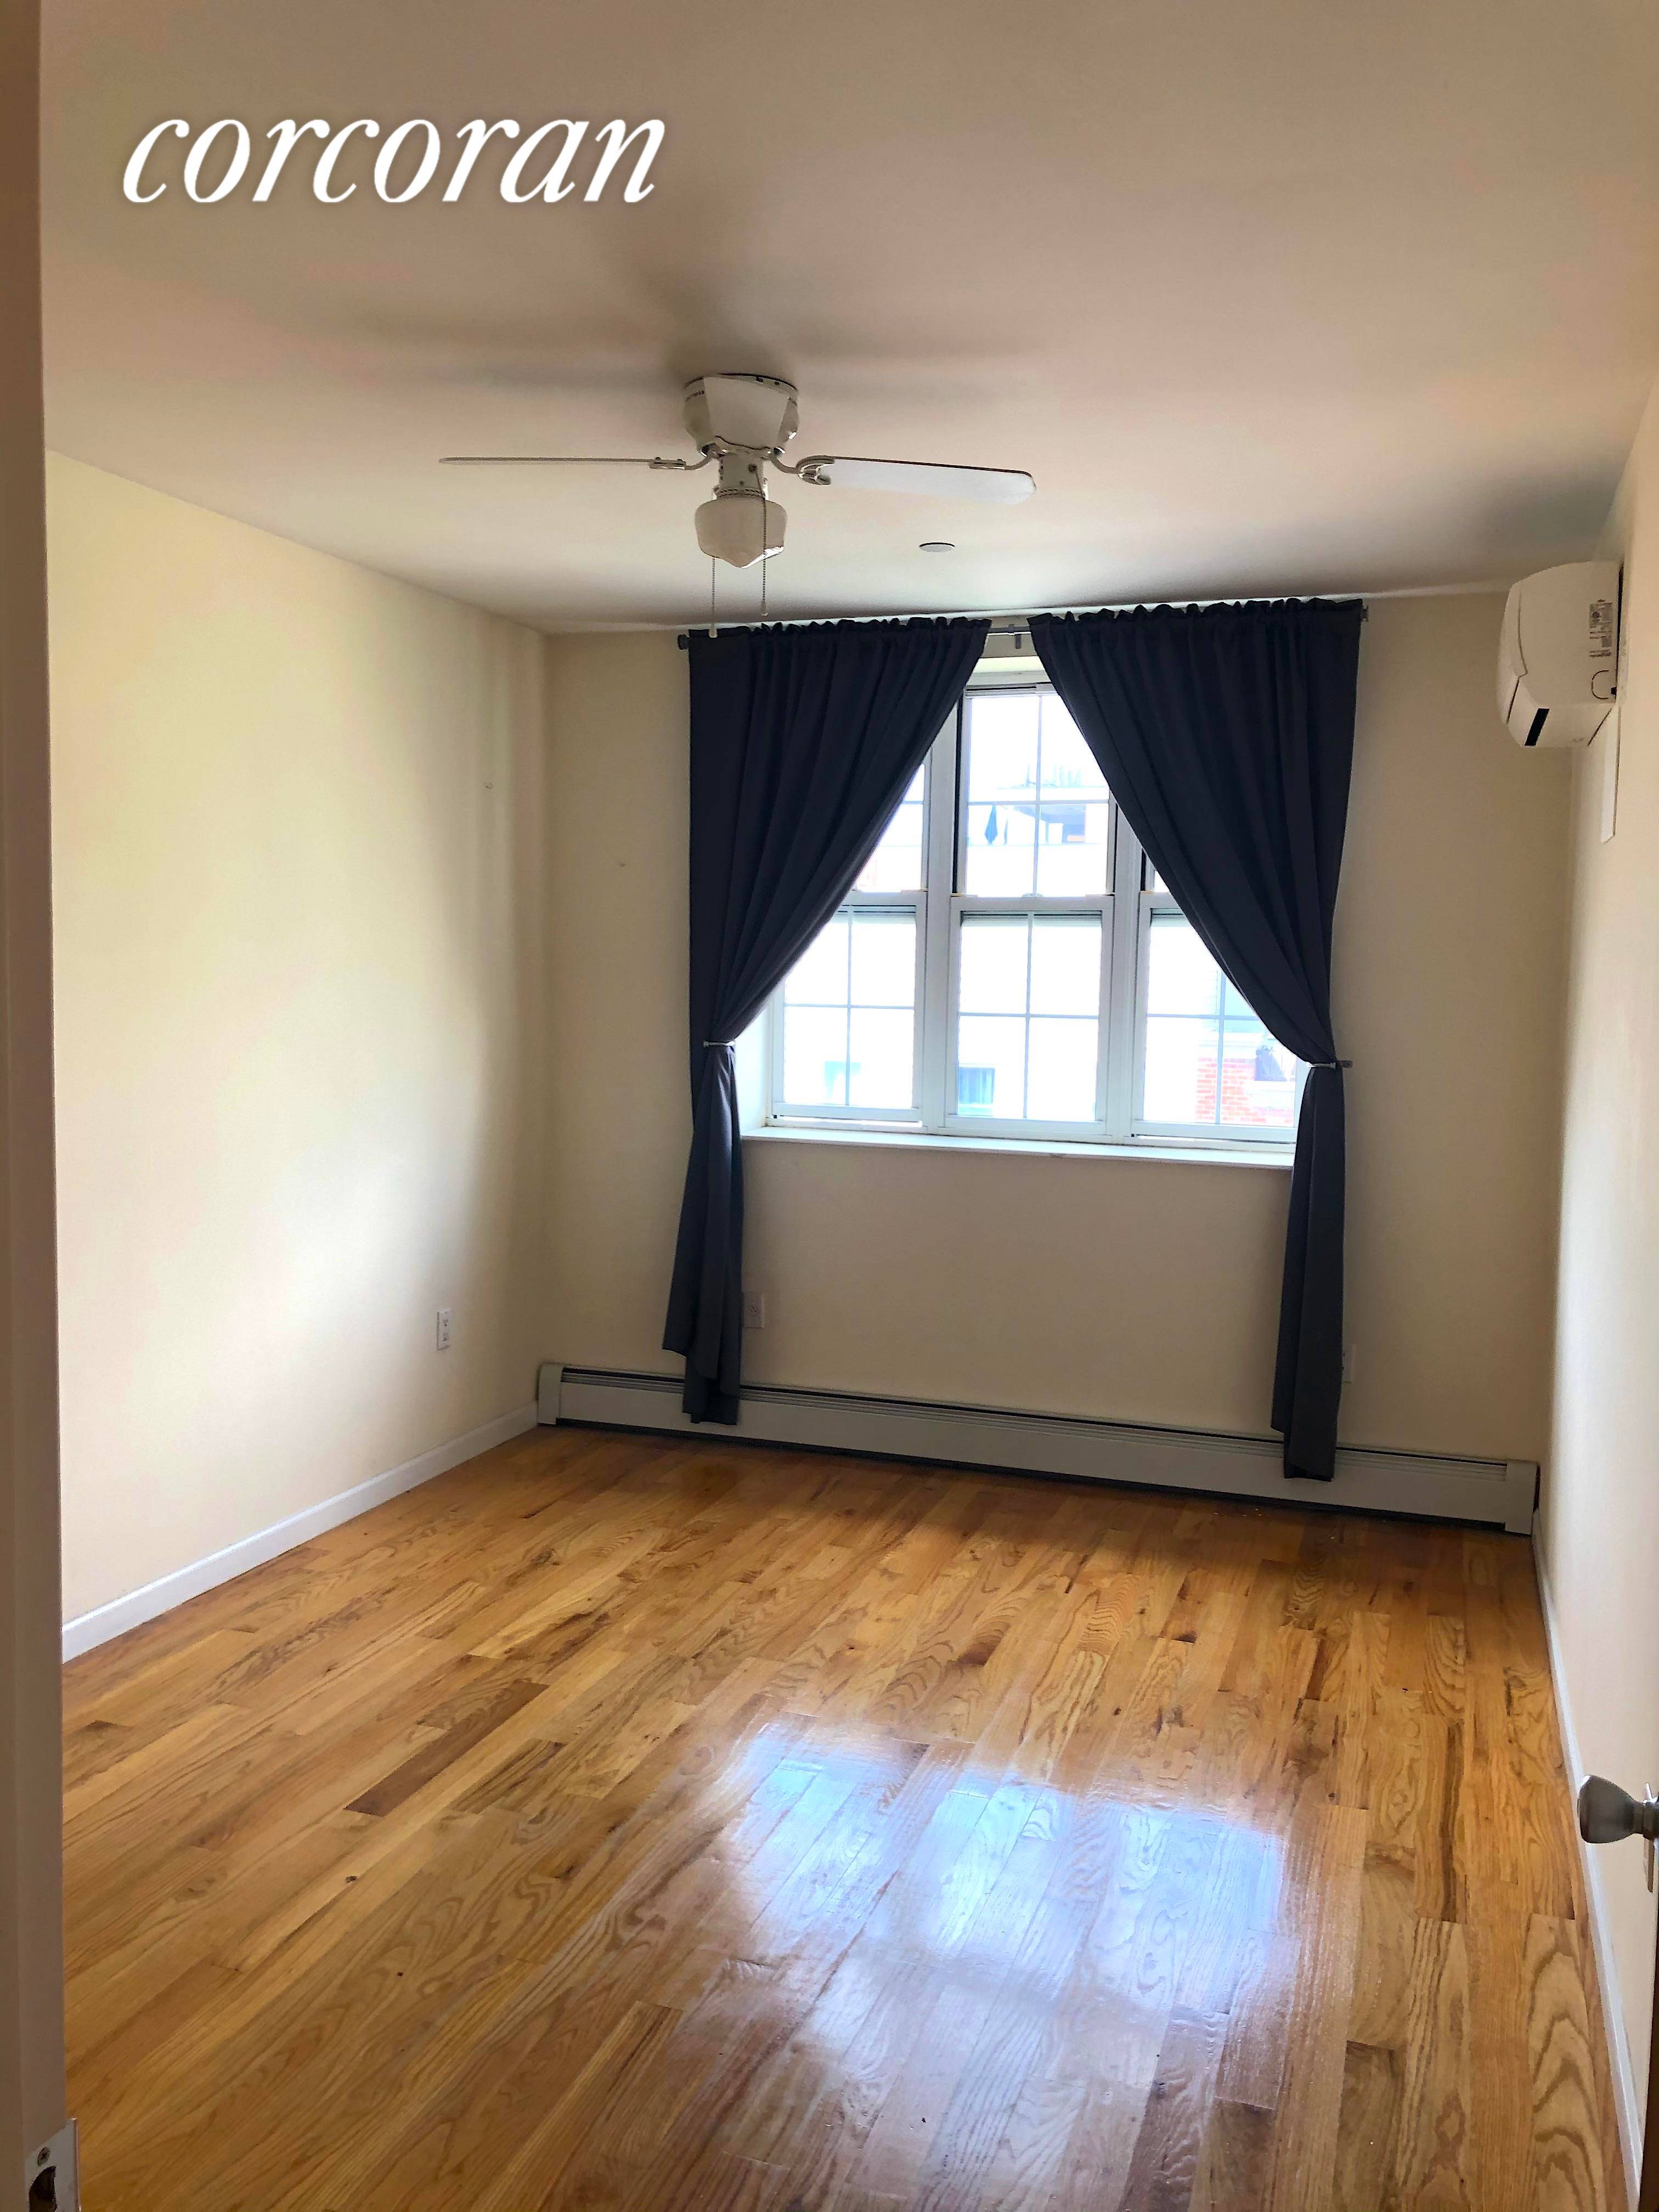 This charming one bedroom apartment is nestled in the heart of Williamsburg, boasting tons of natural lighting, stainless steel appliances, wood floors and a washer and dryer in building.